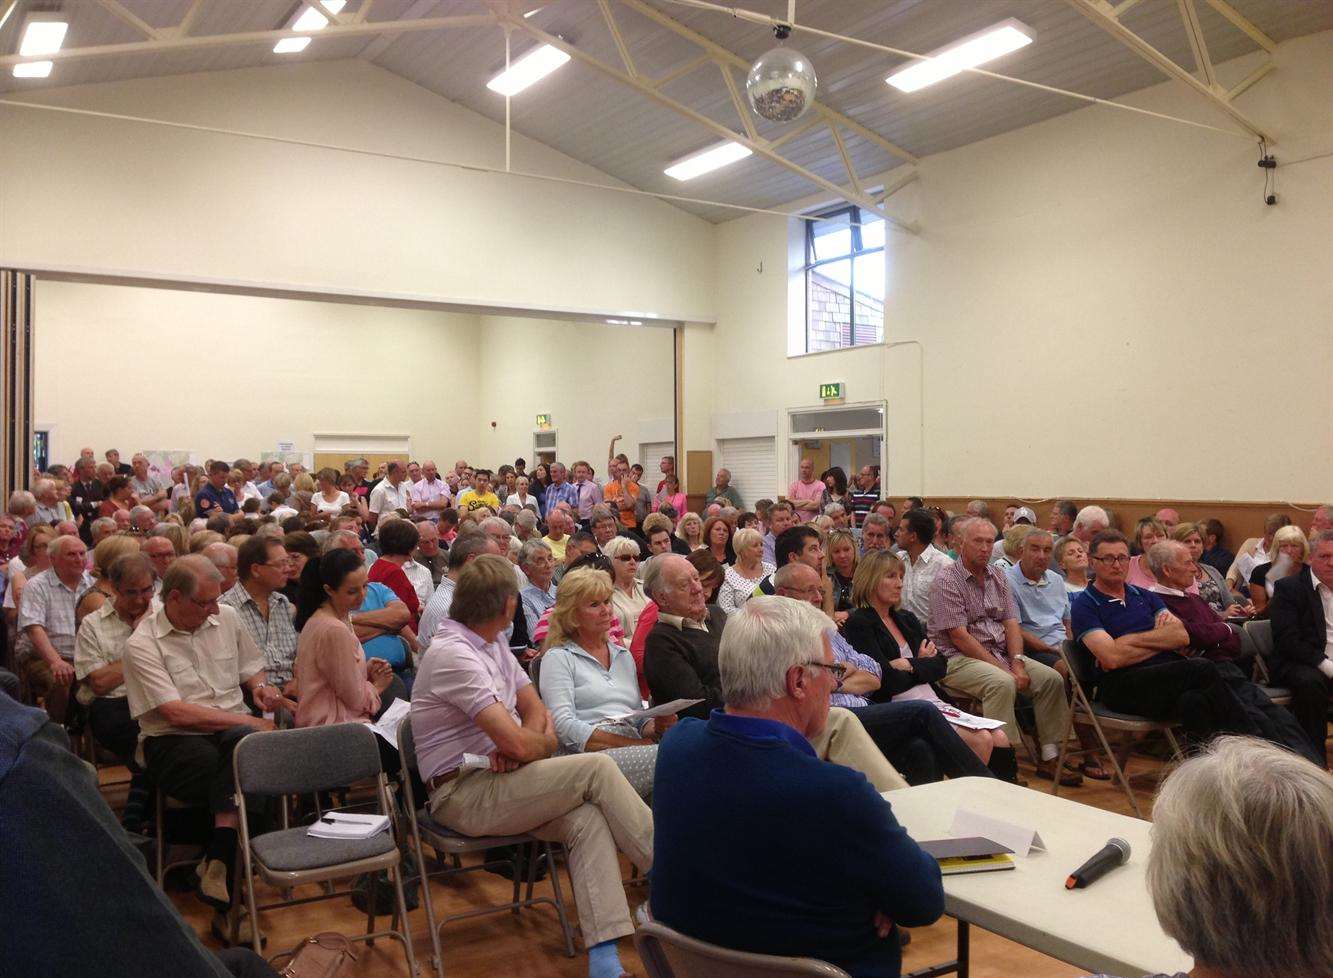 More than 400 people attended a public meeting in 2013 to discuss the proposal for new homes in Kings Hill.